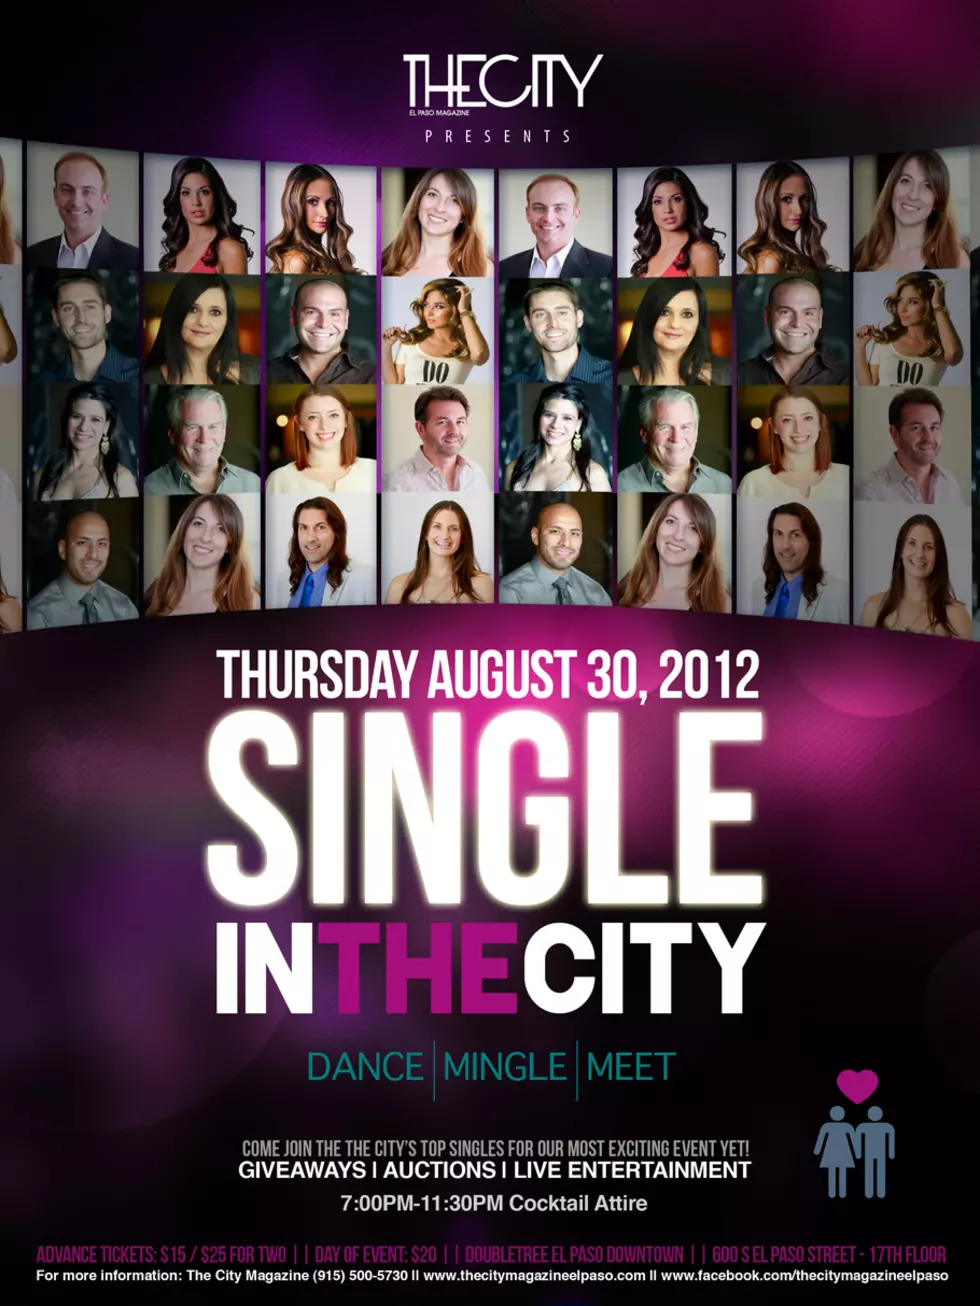 Are You Single In The City? The City Magazine Presents ‘Single In The City’ Tonight